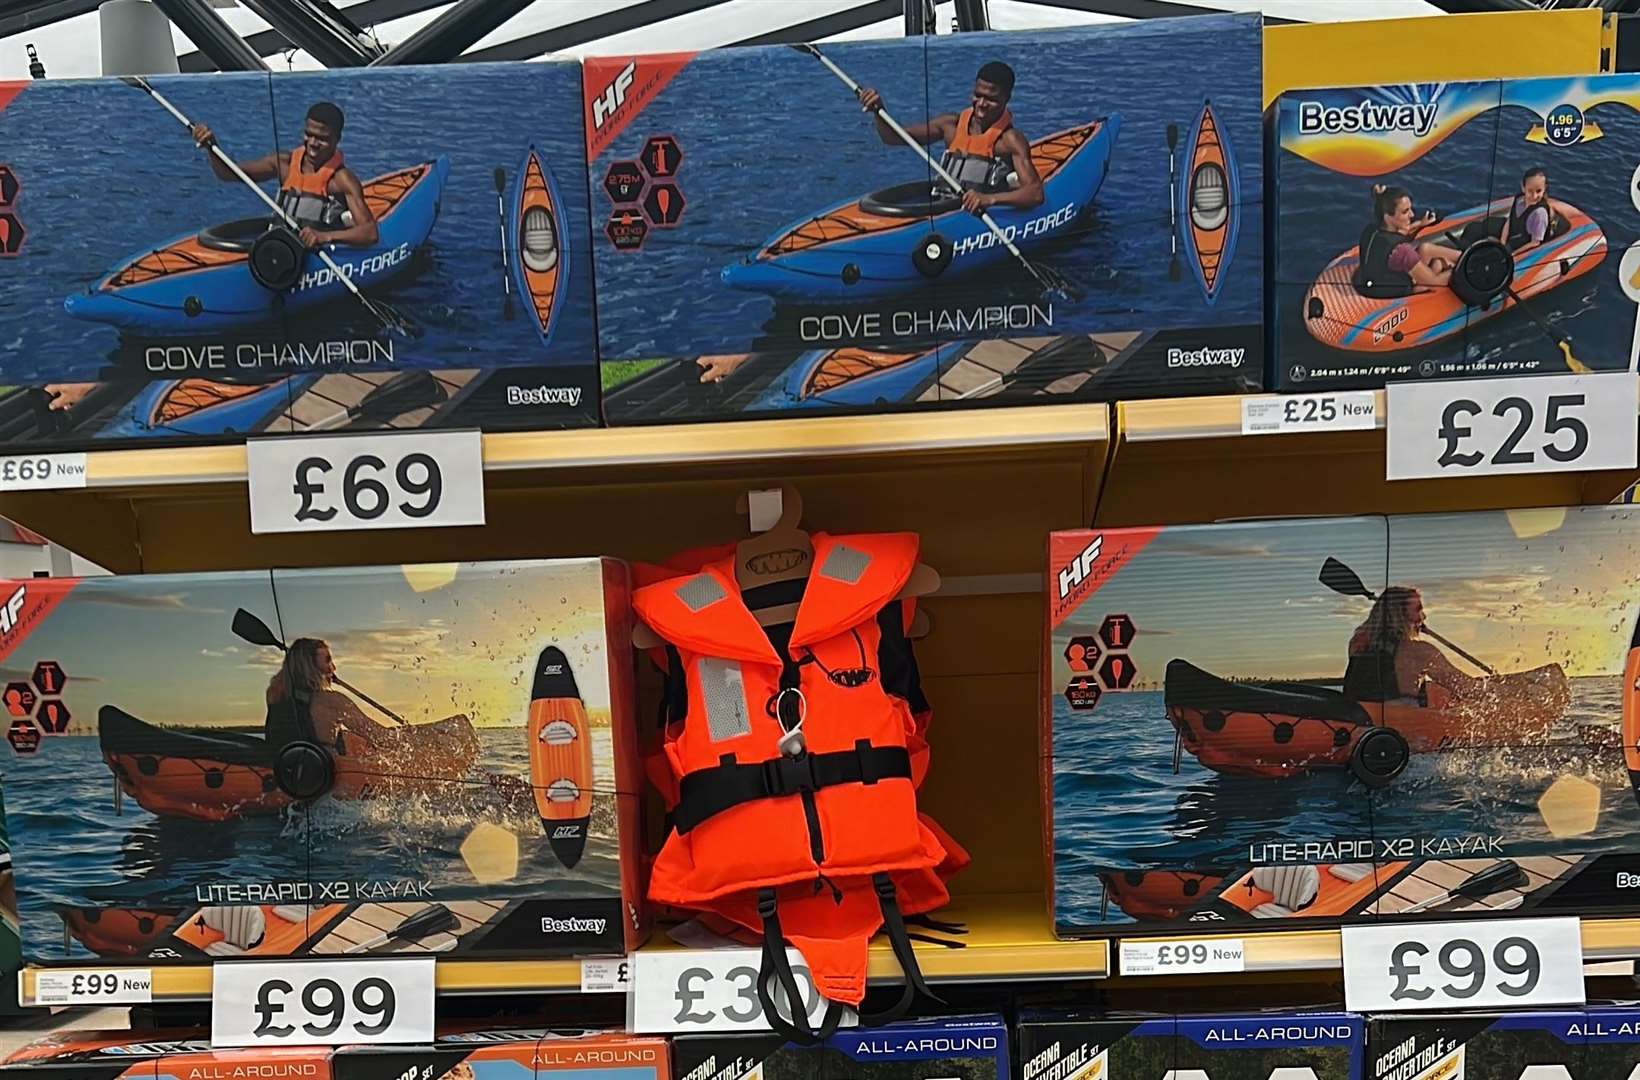 Inflatable kayaks for sale in Tesco